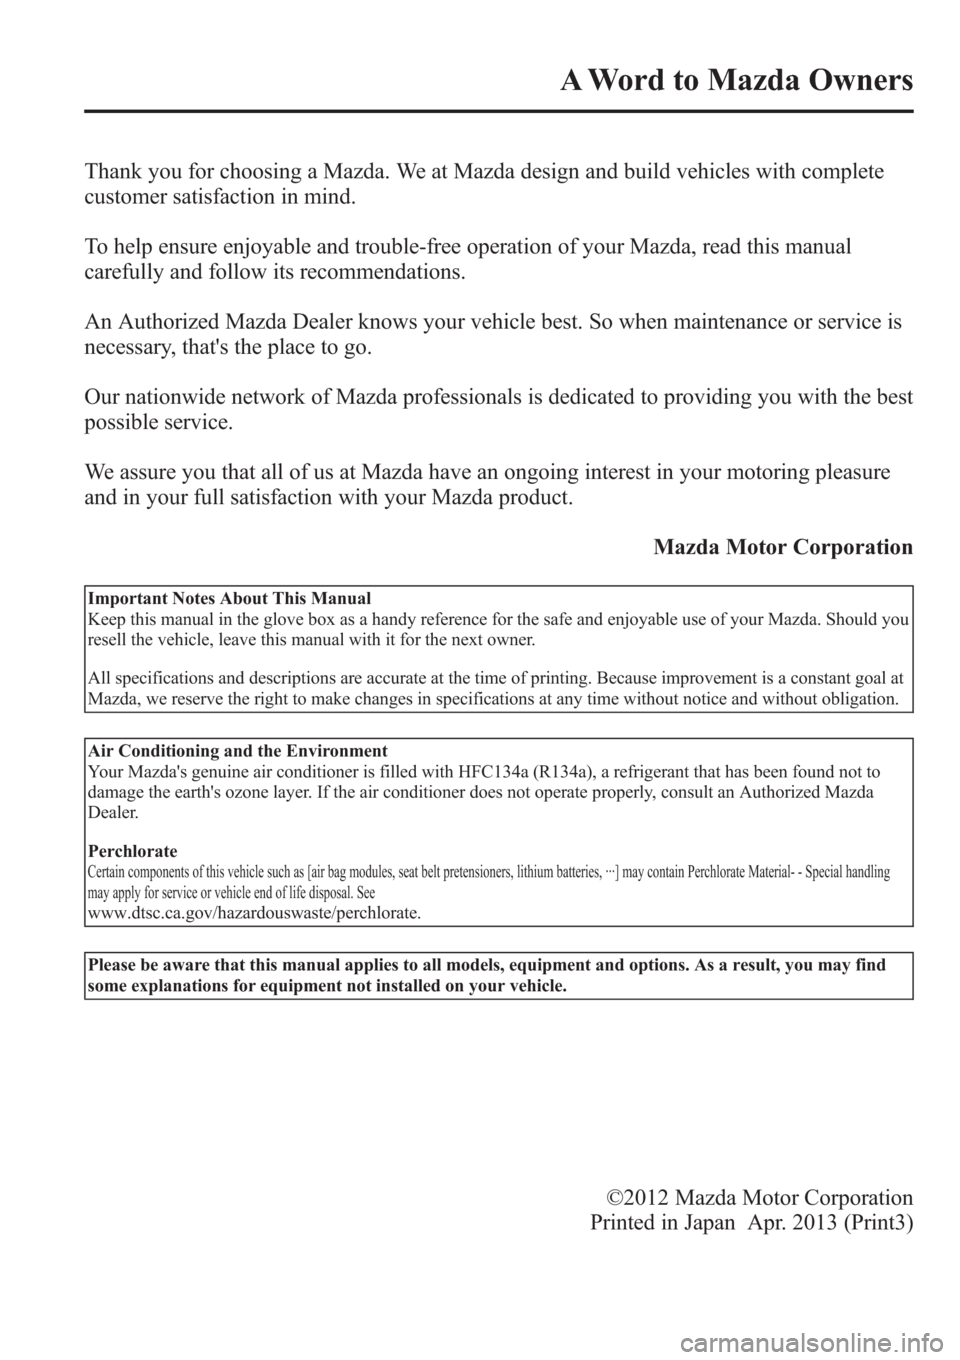 MAZDA MODEL 3 HATCHBACK 2013  Owners Manual (in English) Thank you for choosing a Mazda. We at Mazda design and build vehicles with complete
customer satisfaction in mind.
To help ensure enjoyable and trouble-free operation of your Mazda, read this manual
c